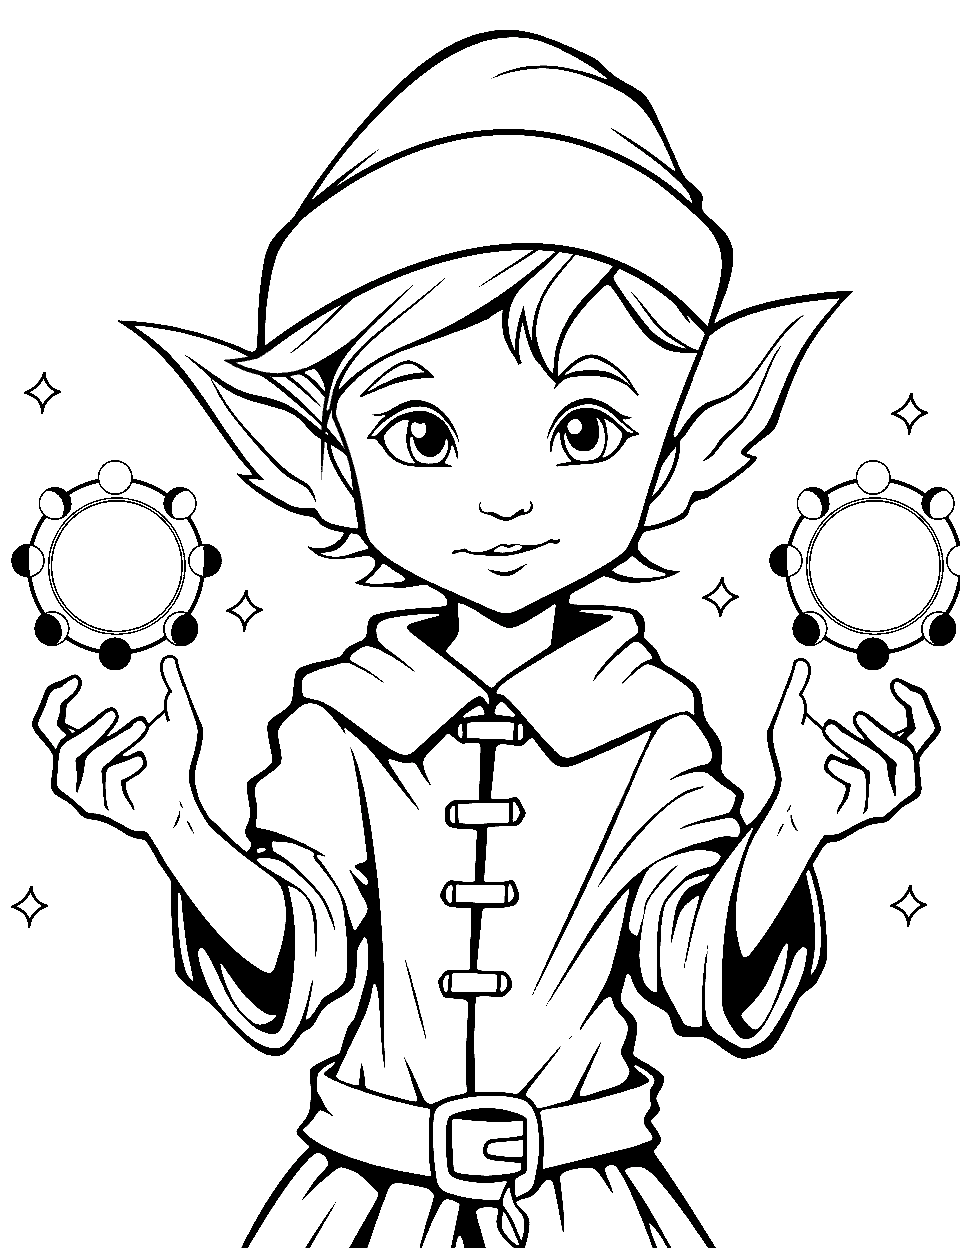 DND Style Elf Mage Casting Spells Coloring Page - An elf mage casting a spell, inspired by Dungeons & Dragons.